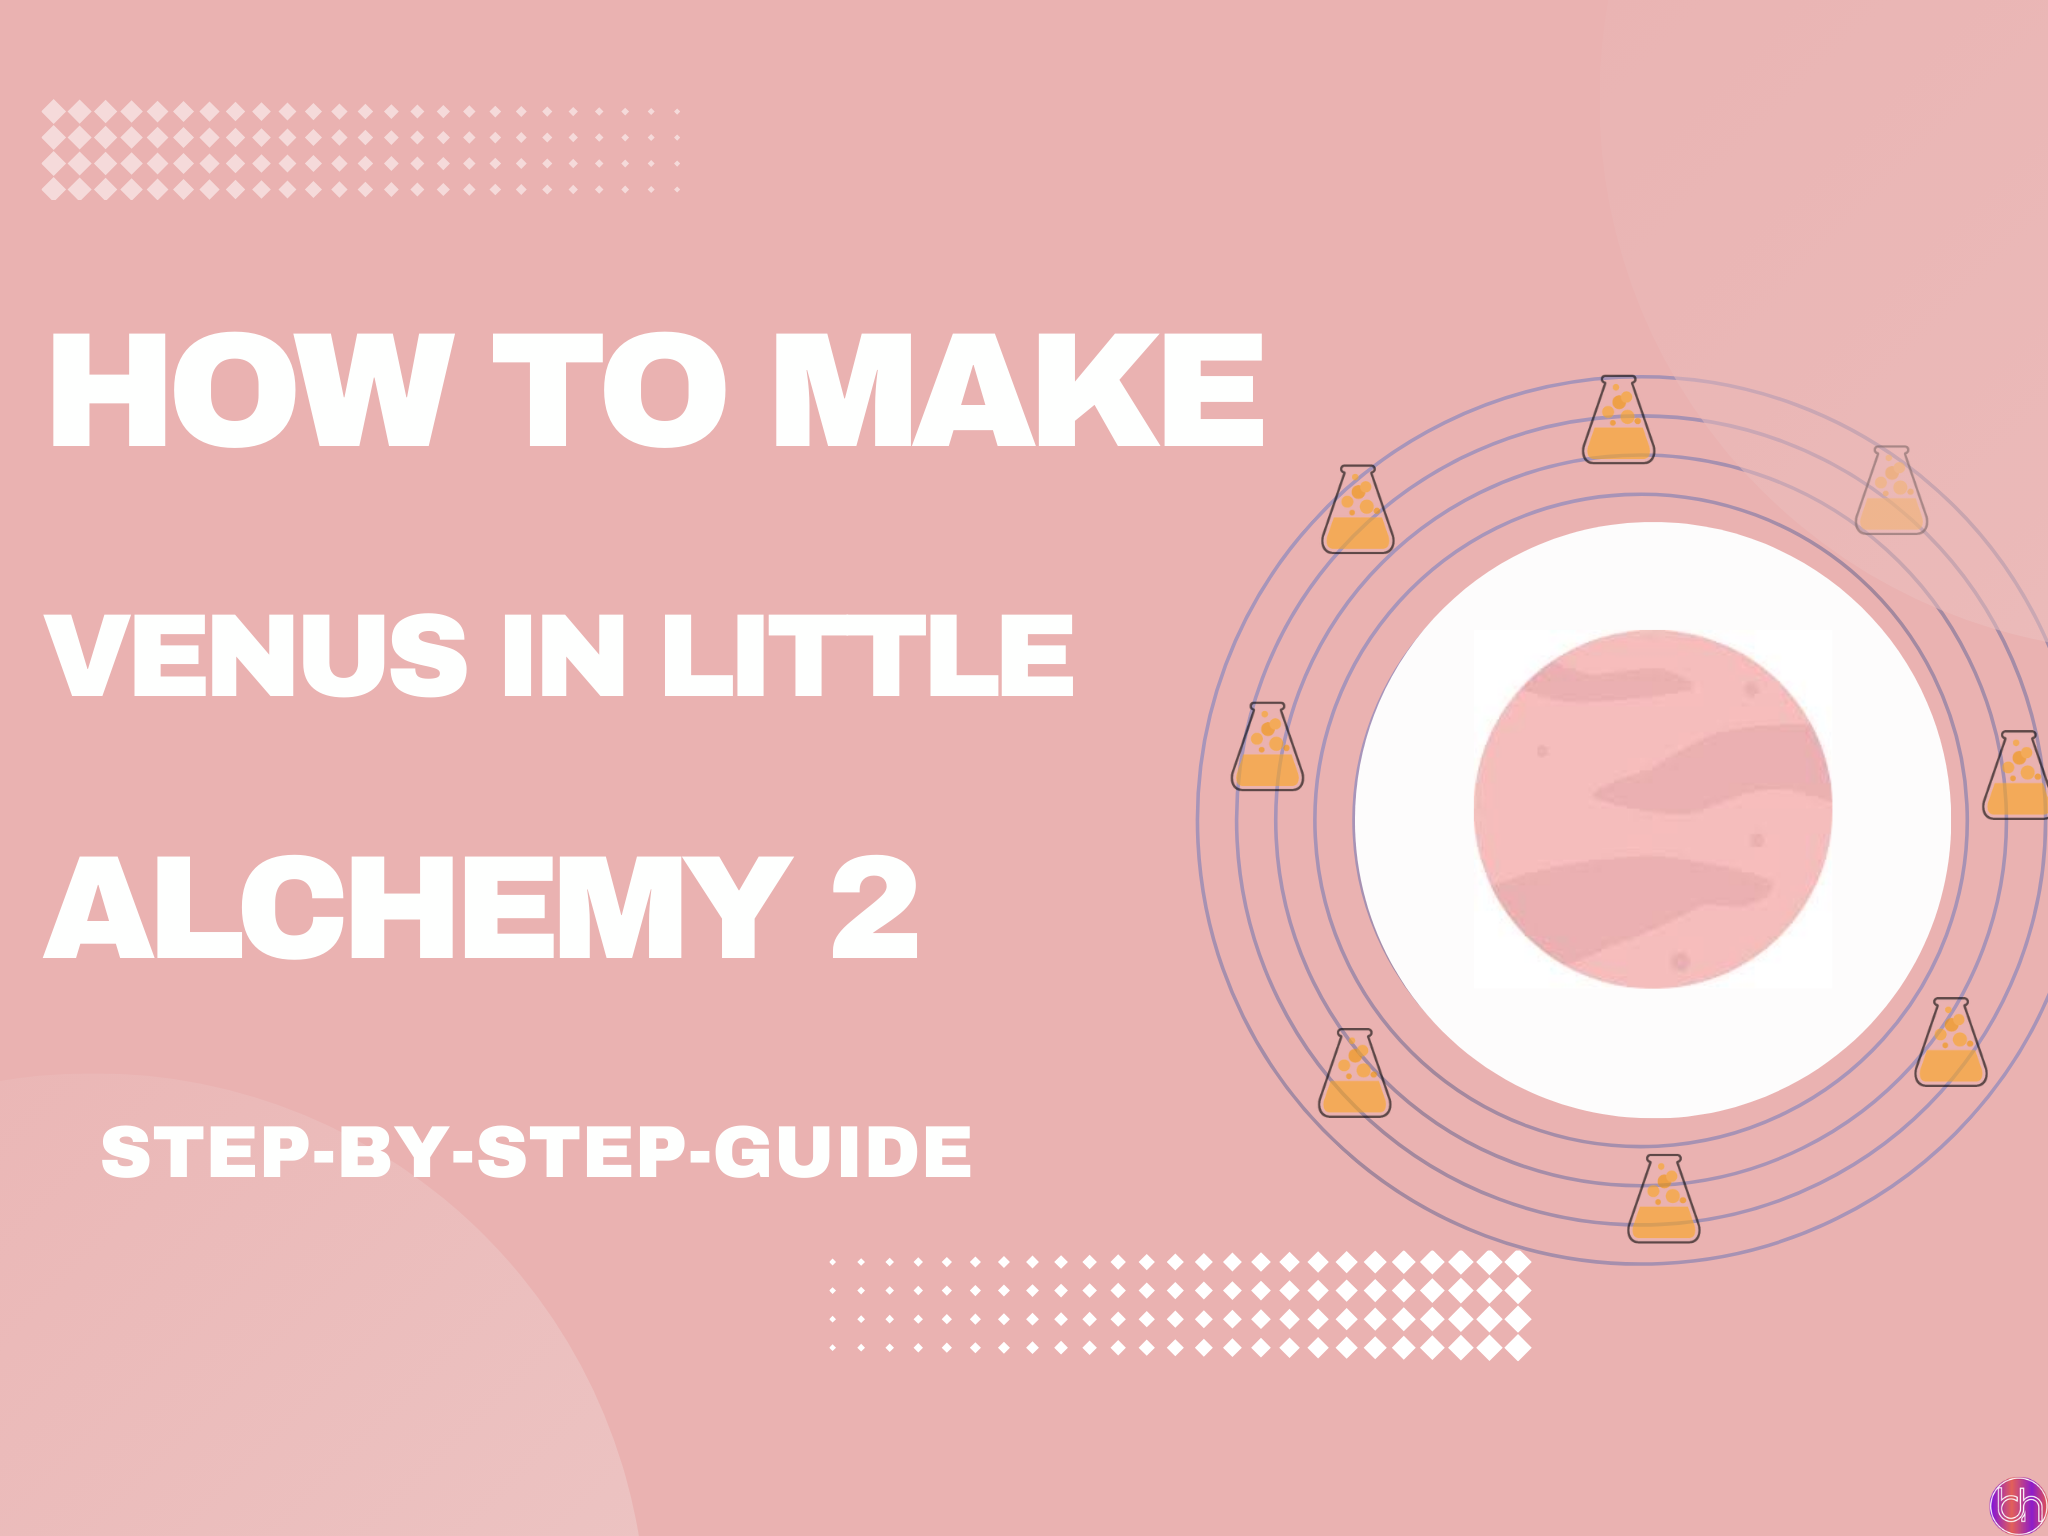 How to make Venus in little alchemy 2